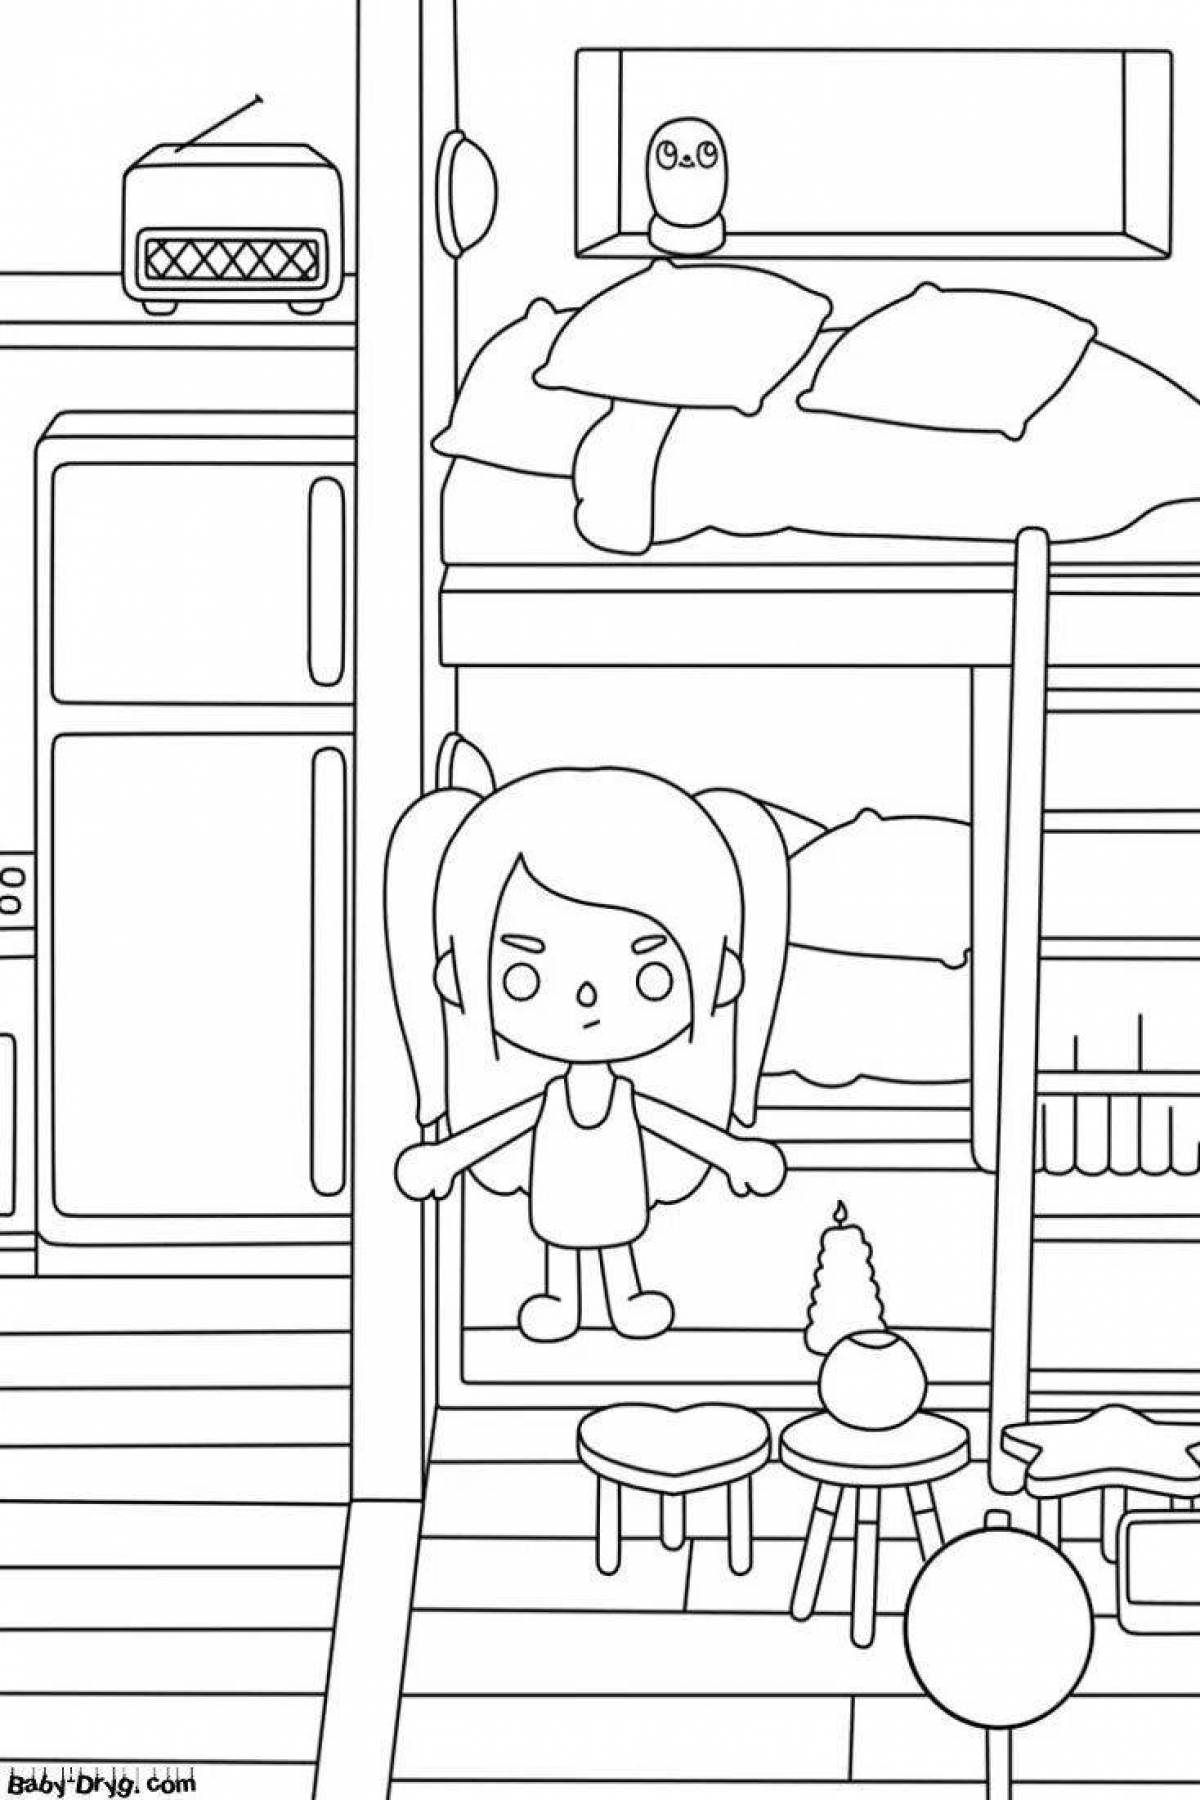 Great coloring pages for girls from tok bok